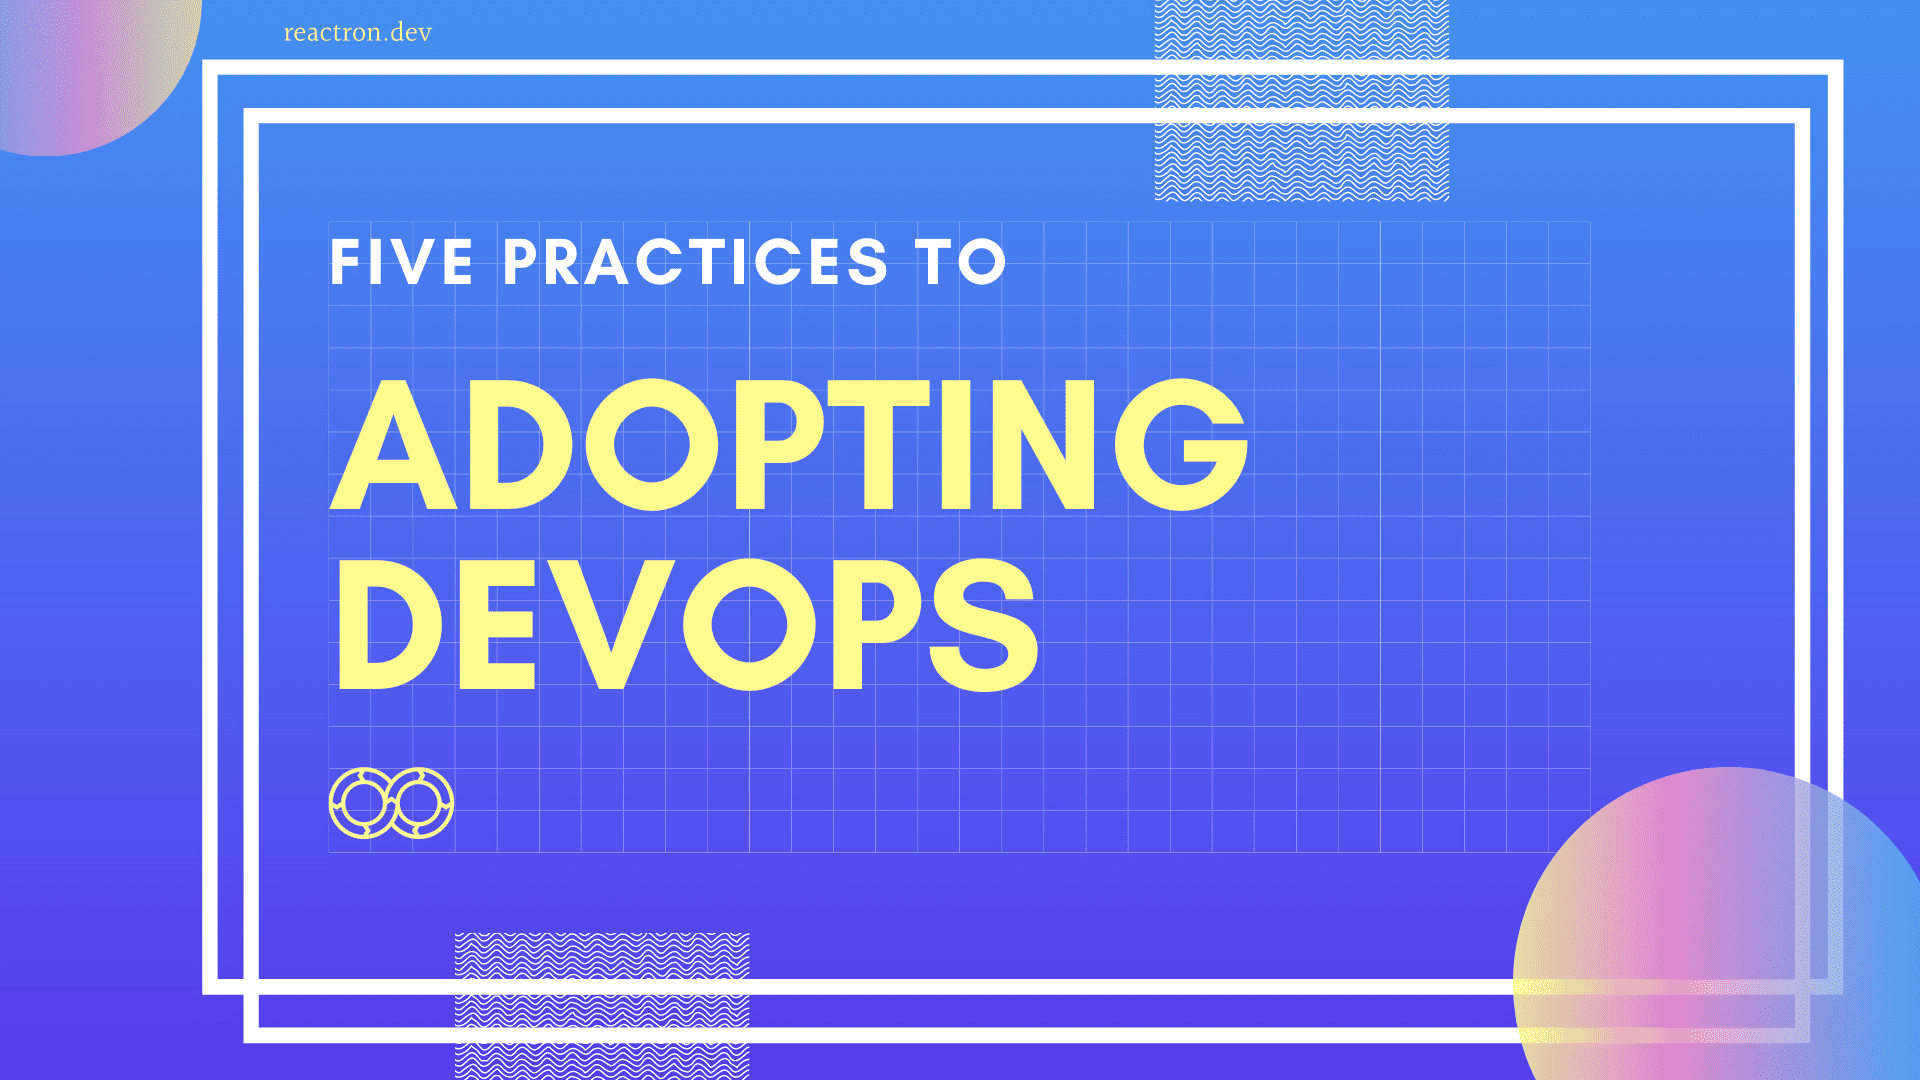 How To Adopt DevOps - 5 most important practices in 2021